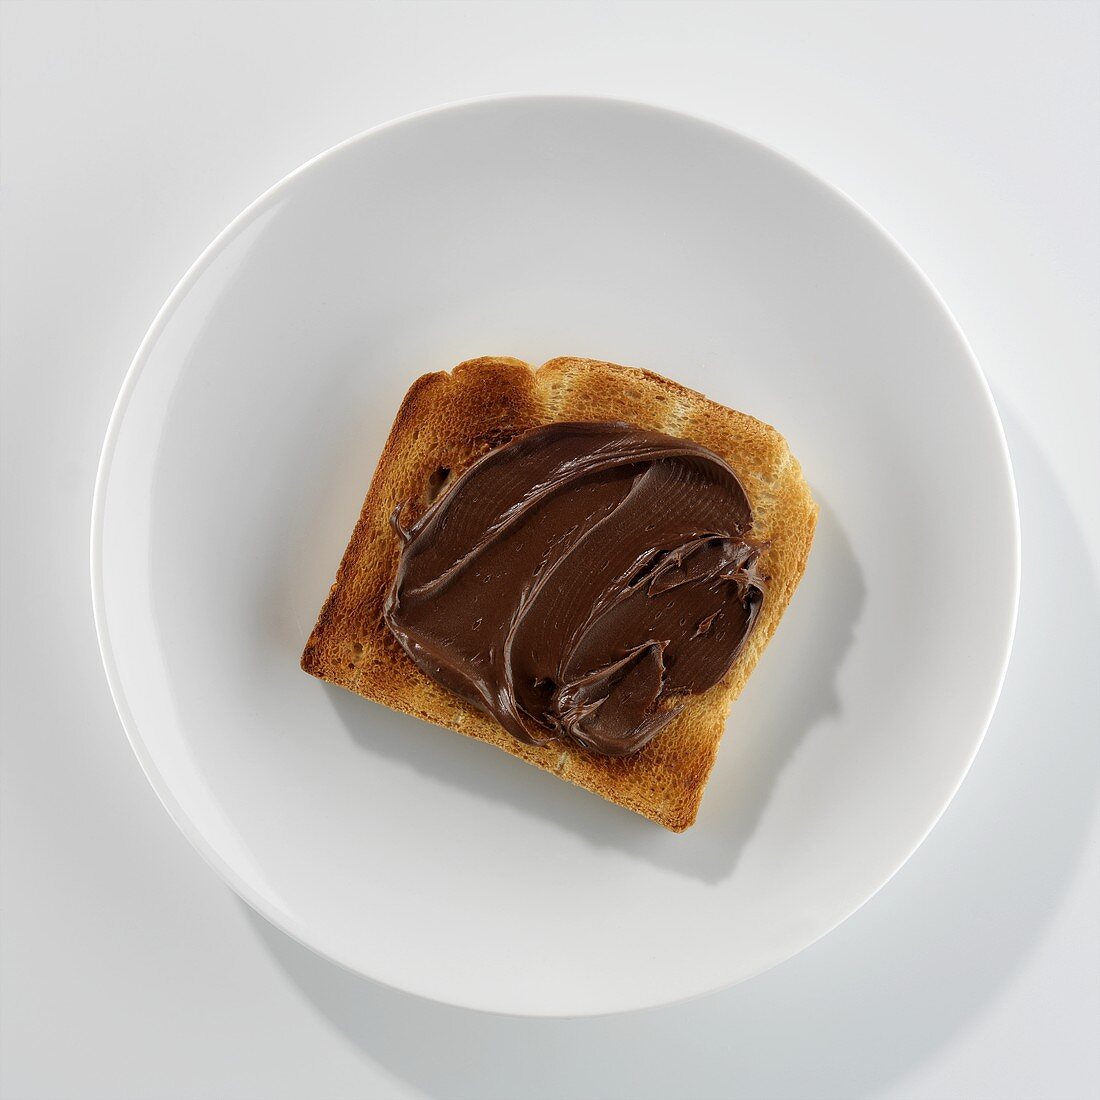 A slice of toast with Nutella on a plate